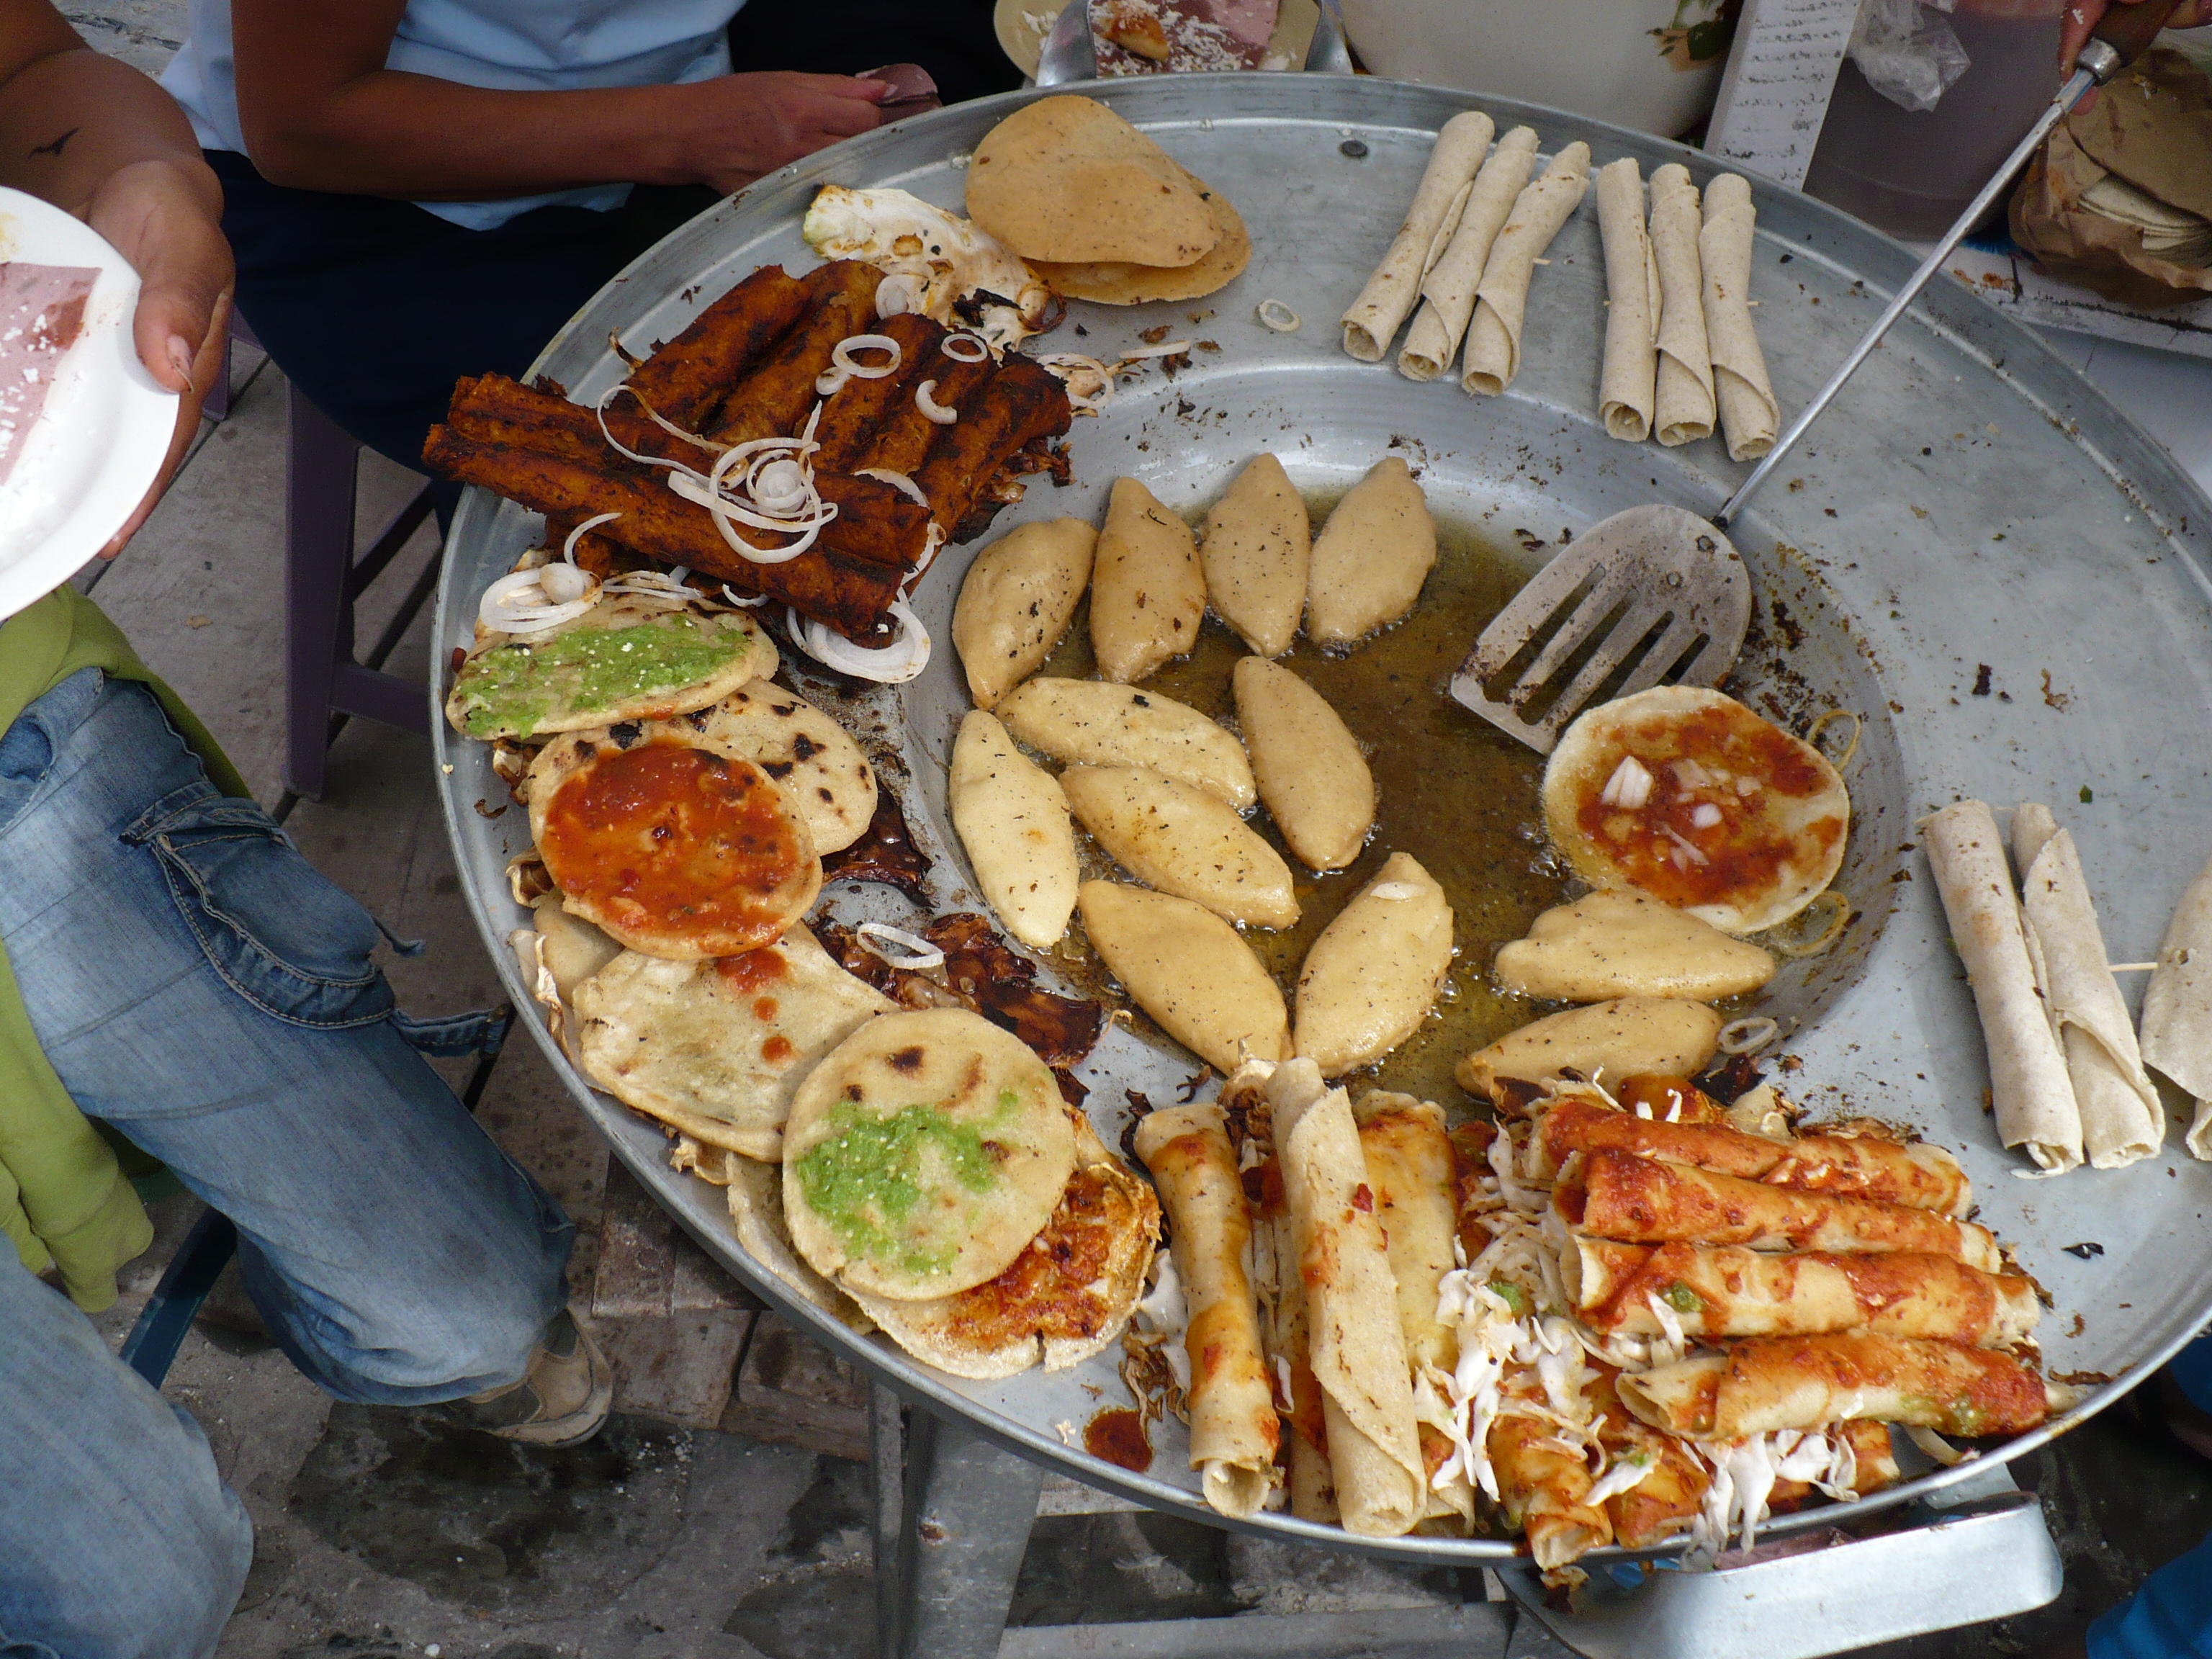 Fried tacos and enchiladas with salsa in Cuetzalan.